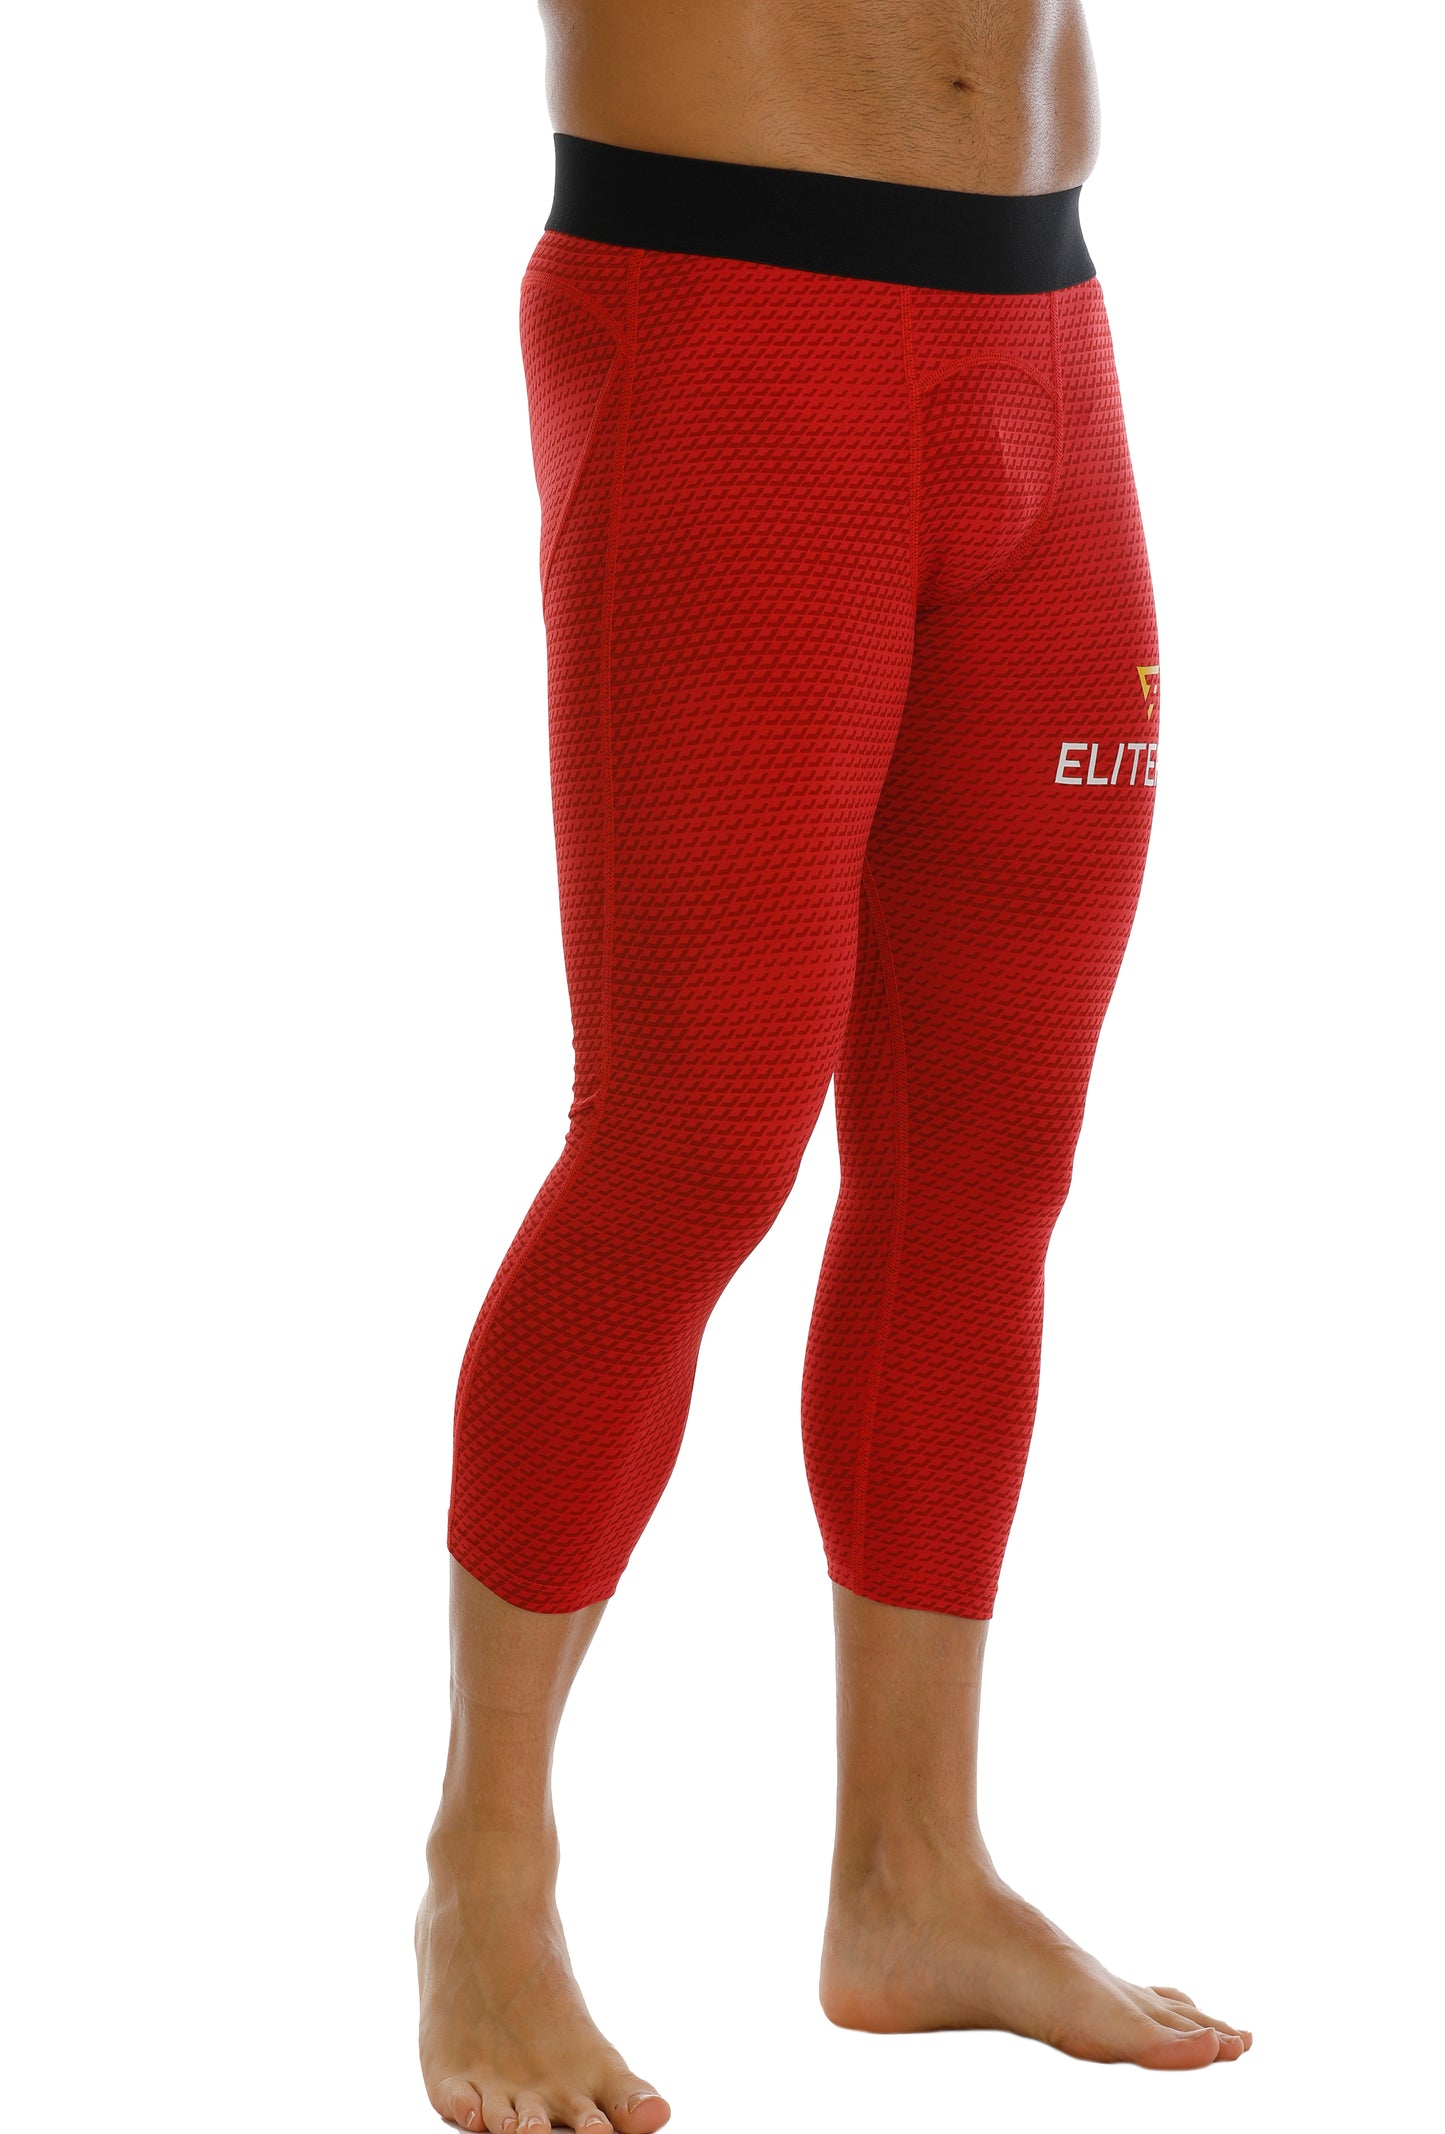 ALCEO tights (red)